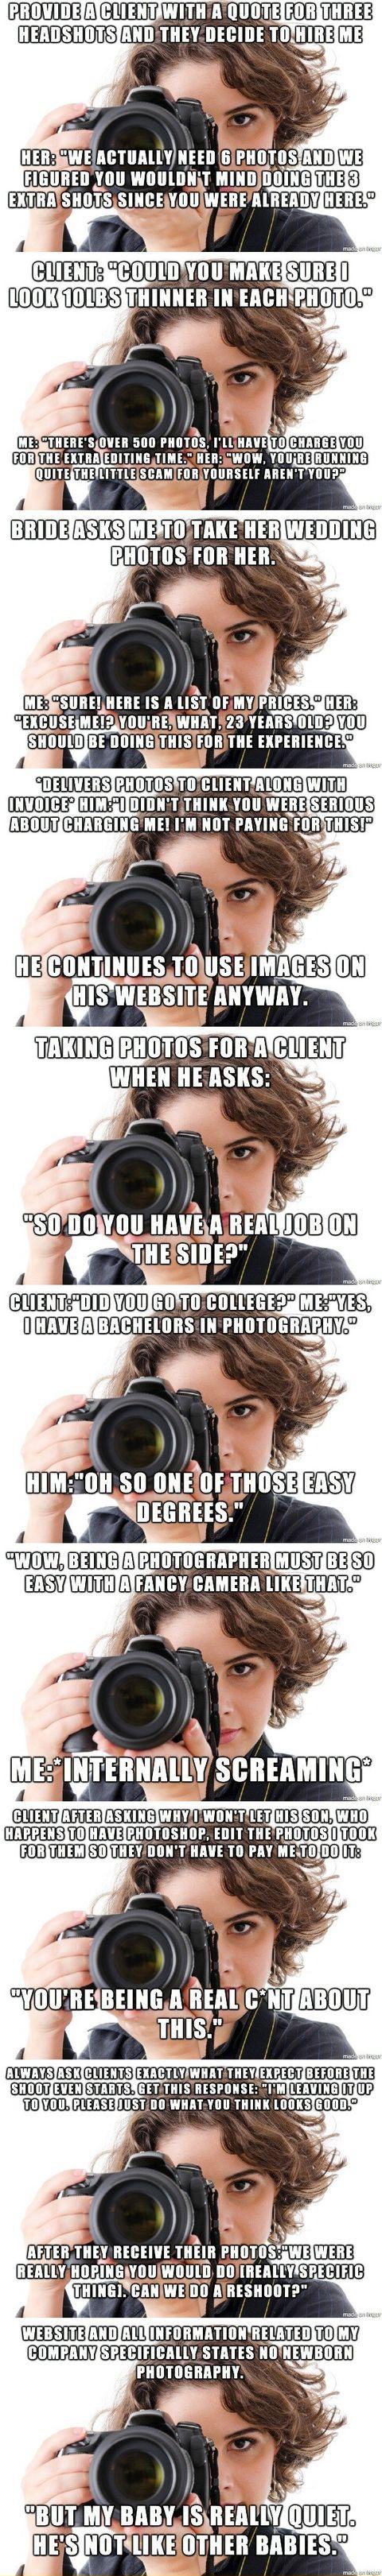 Photography woes